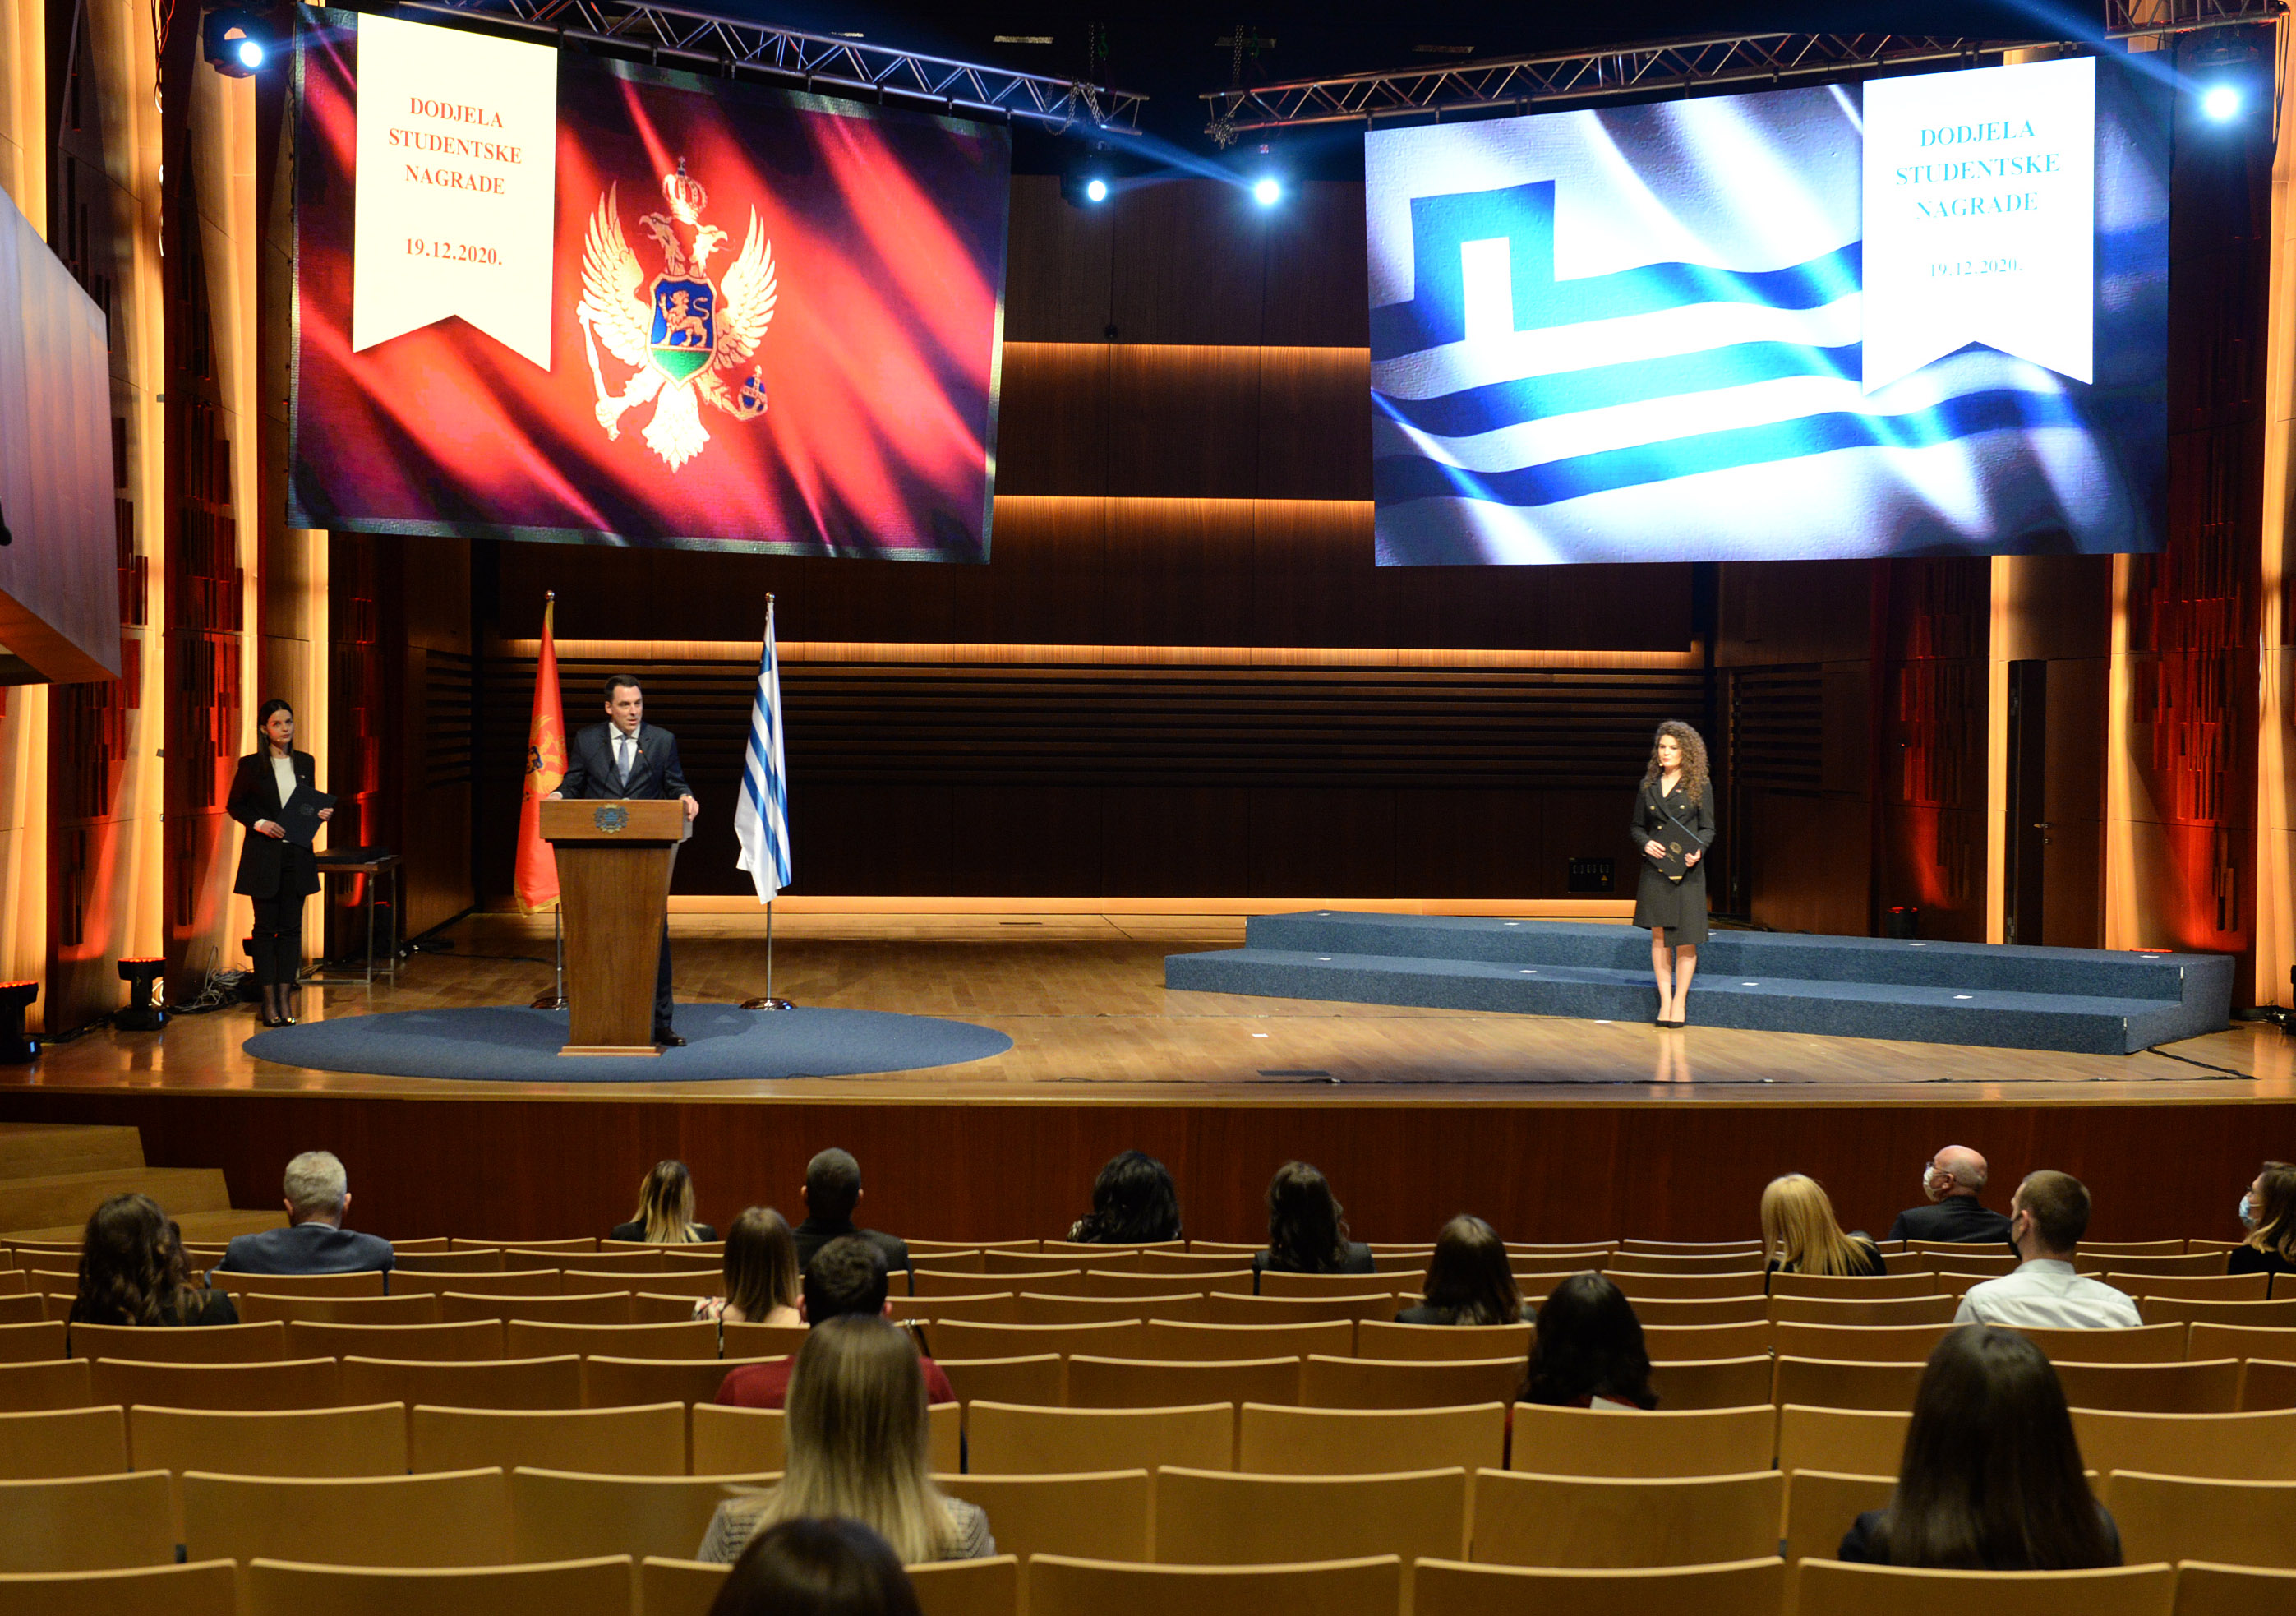 The best students of Podgorica for 2020 awarded